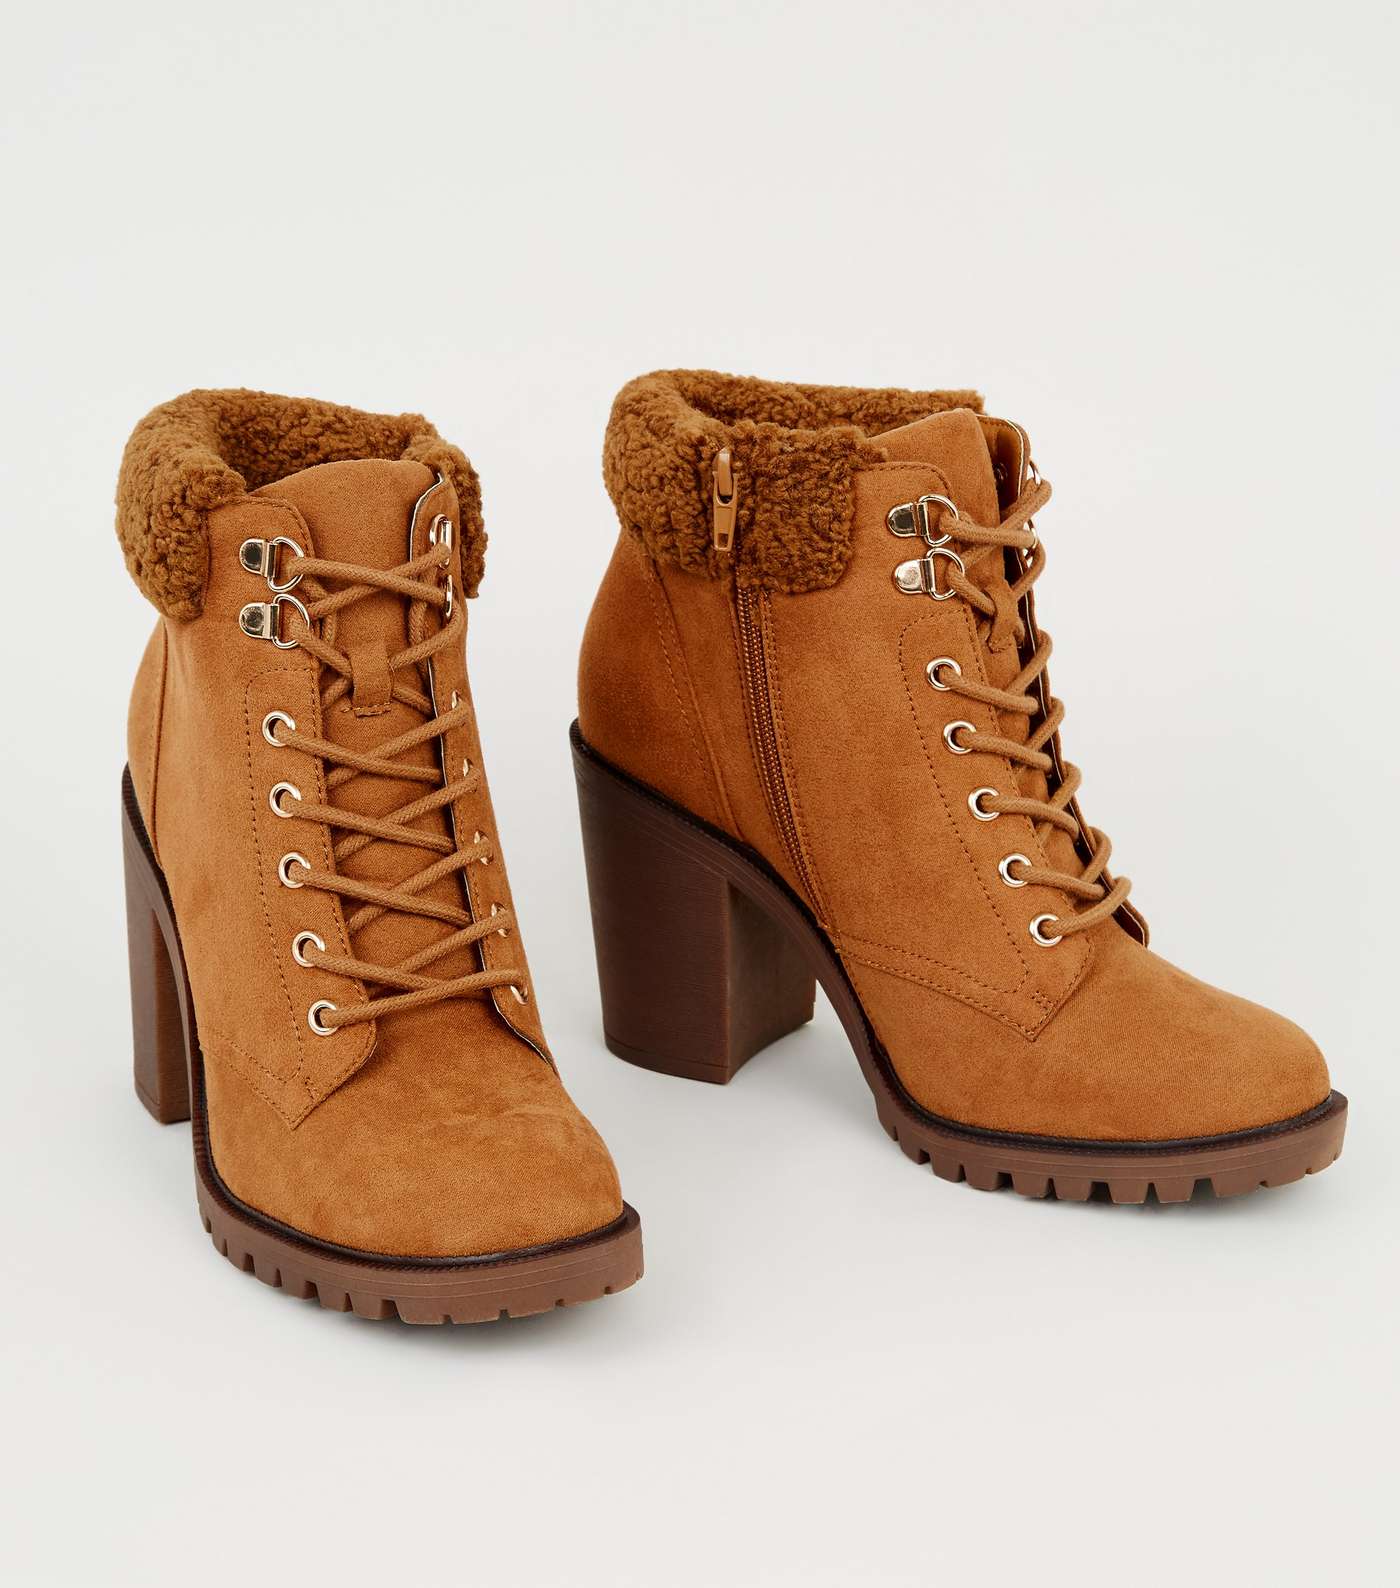 Tan Teddy Trim Block Heel Lace Up Boots Image 3